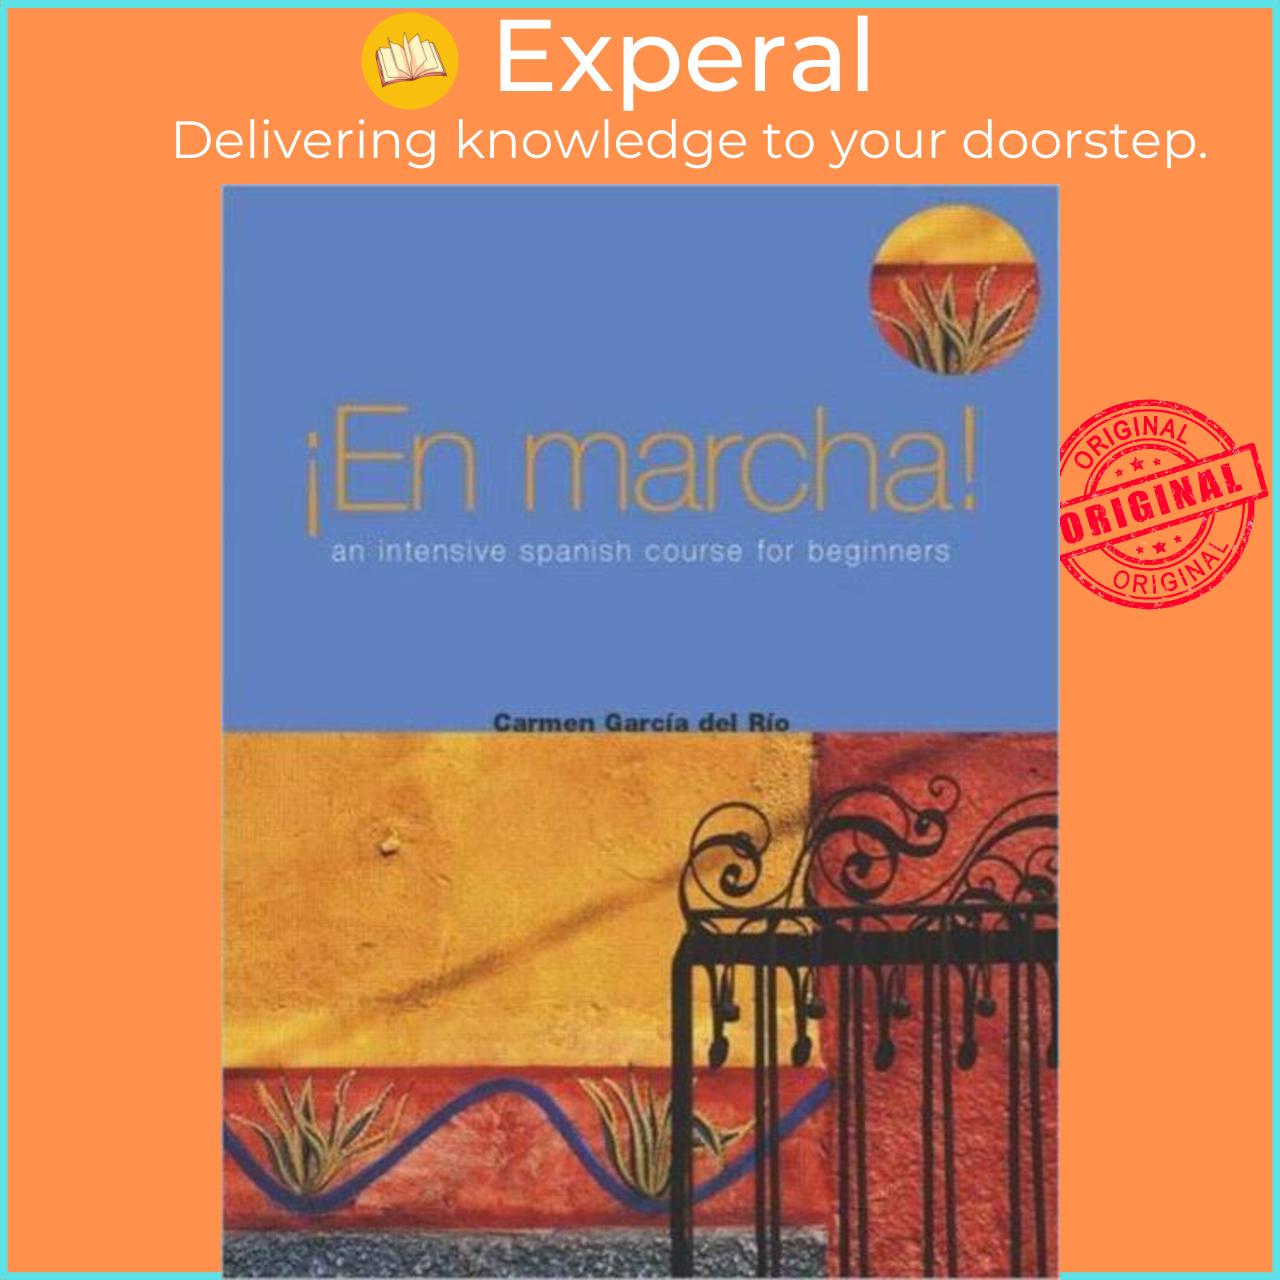 Sách - En Marcha: An Intensive Spanish Course for Beginners by Carmen Garcia del Rio (UK edition, paperback)